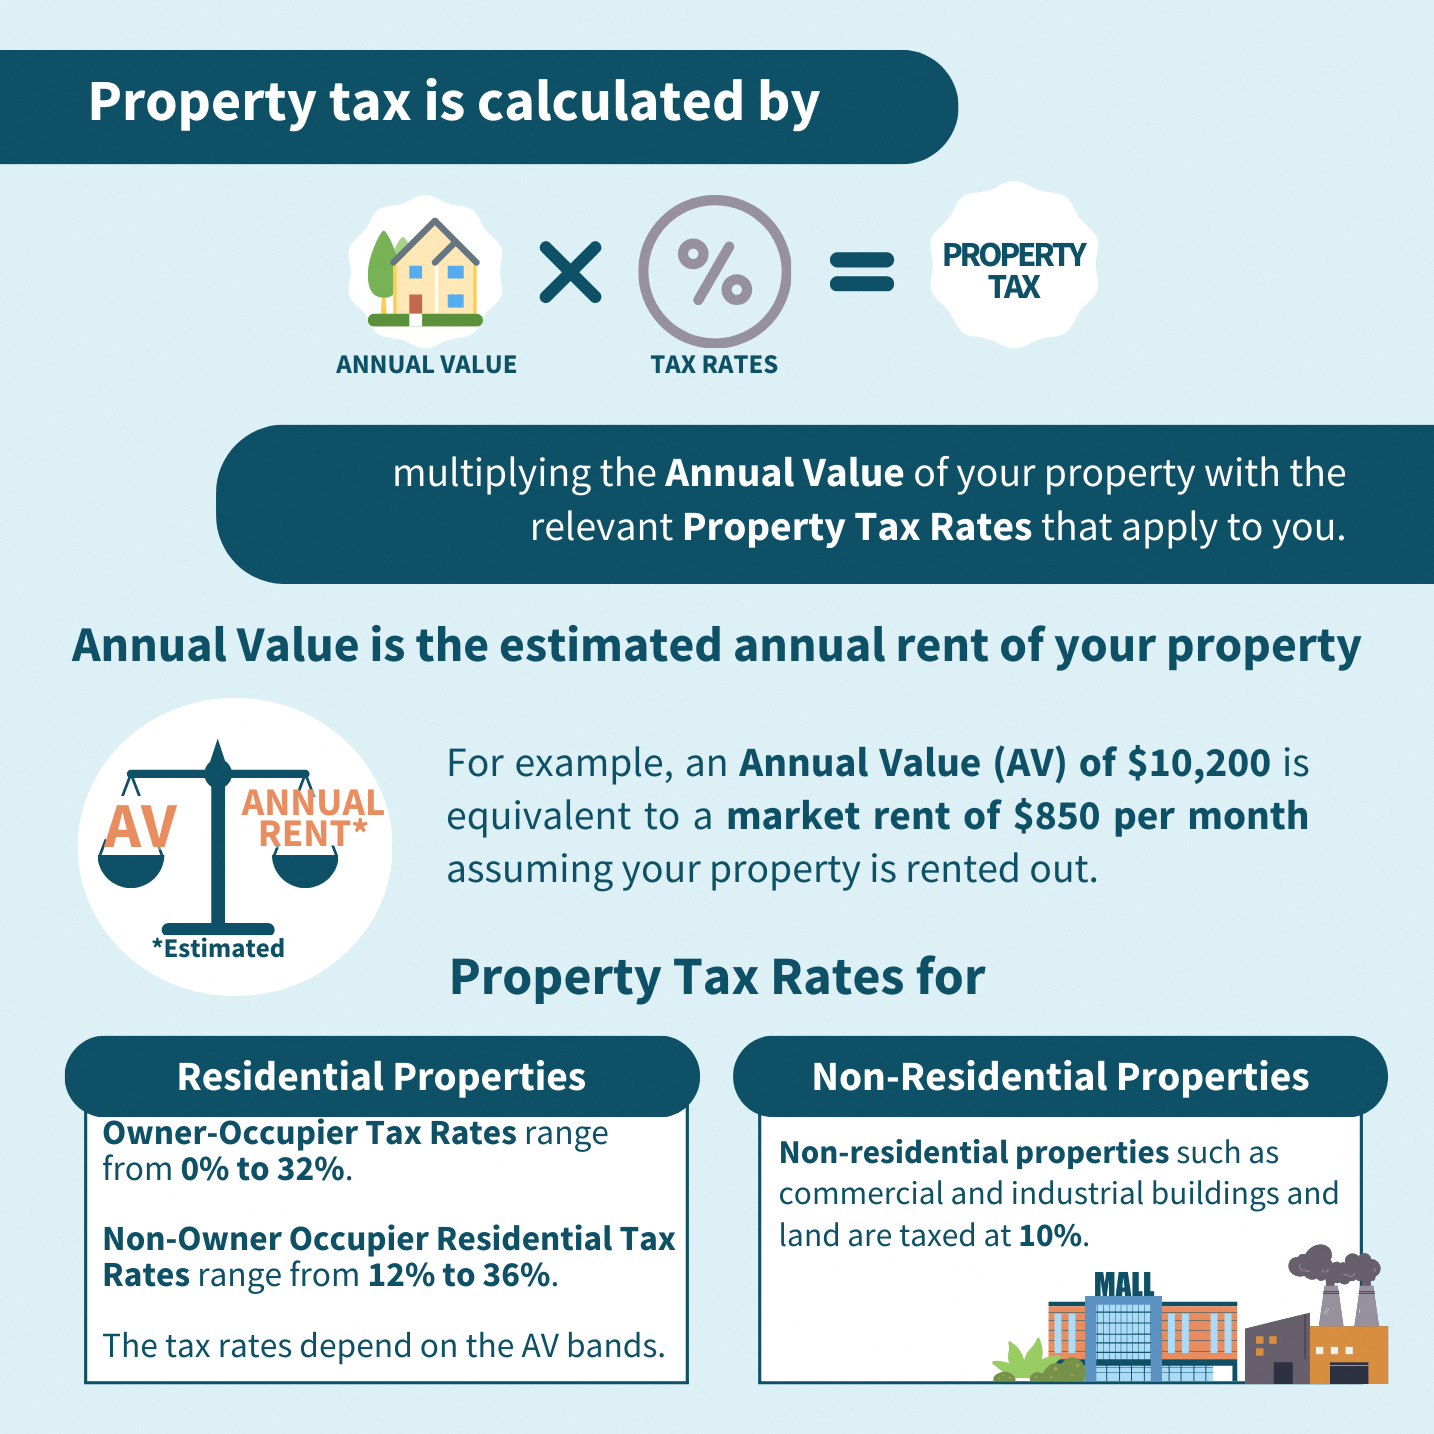 How is Property Tax calculated